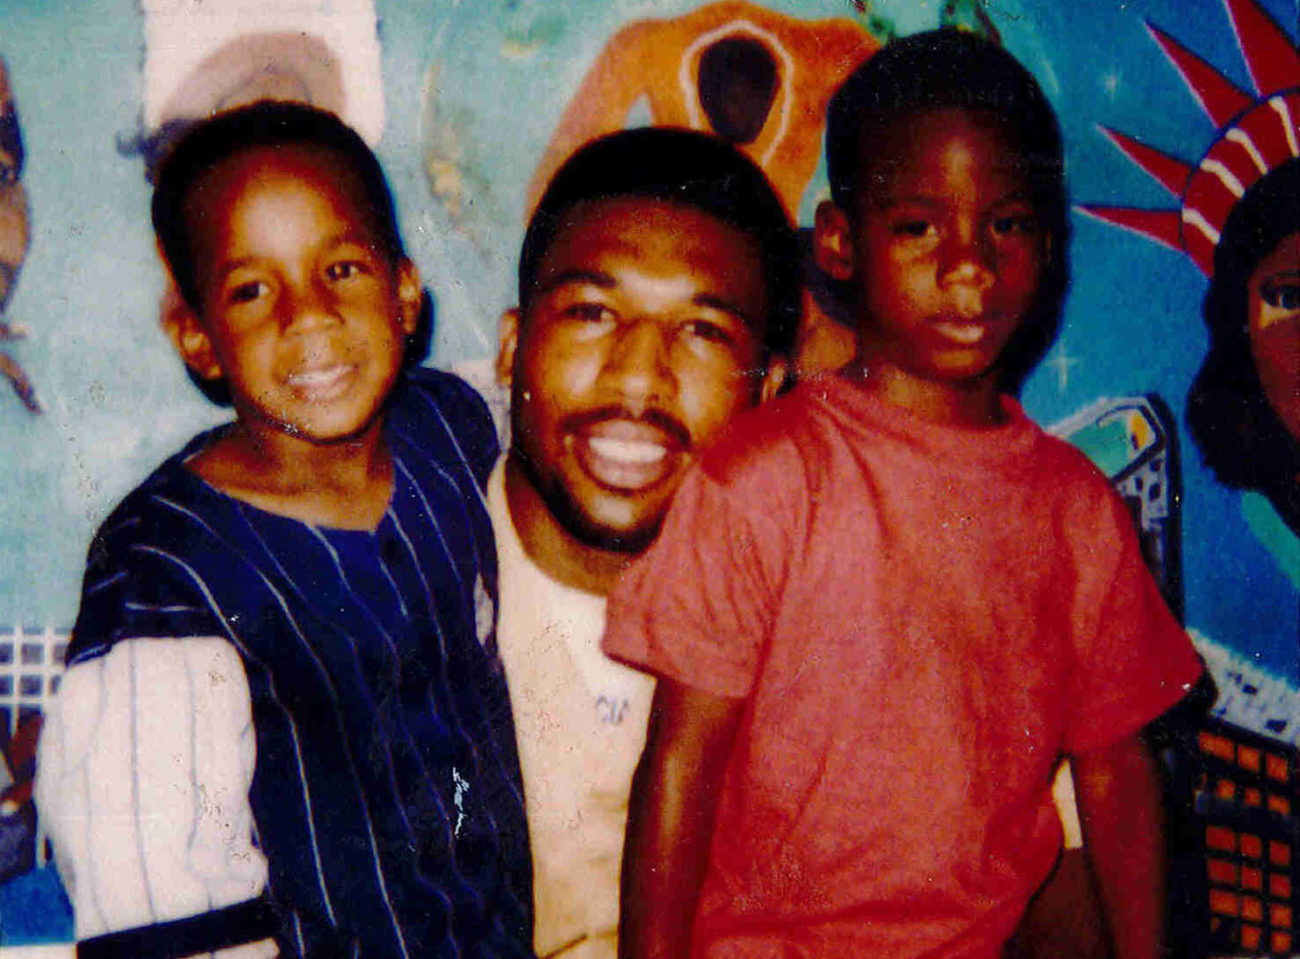 Anthony Wright and his son Tony Wright Jr. in 1991.